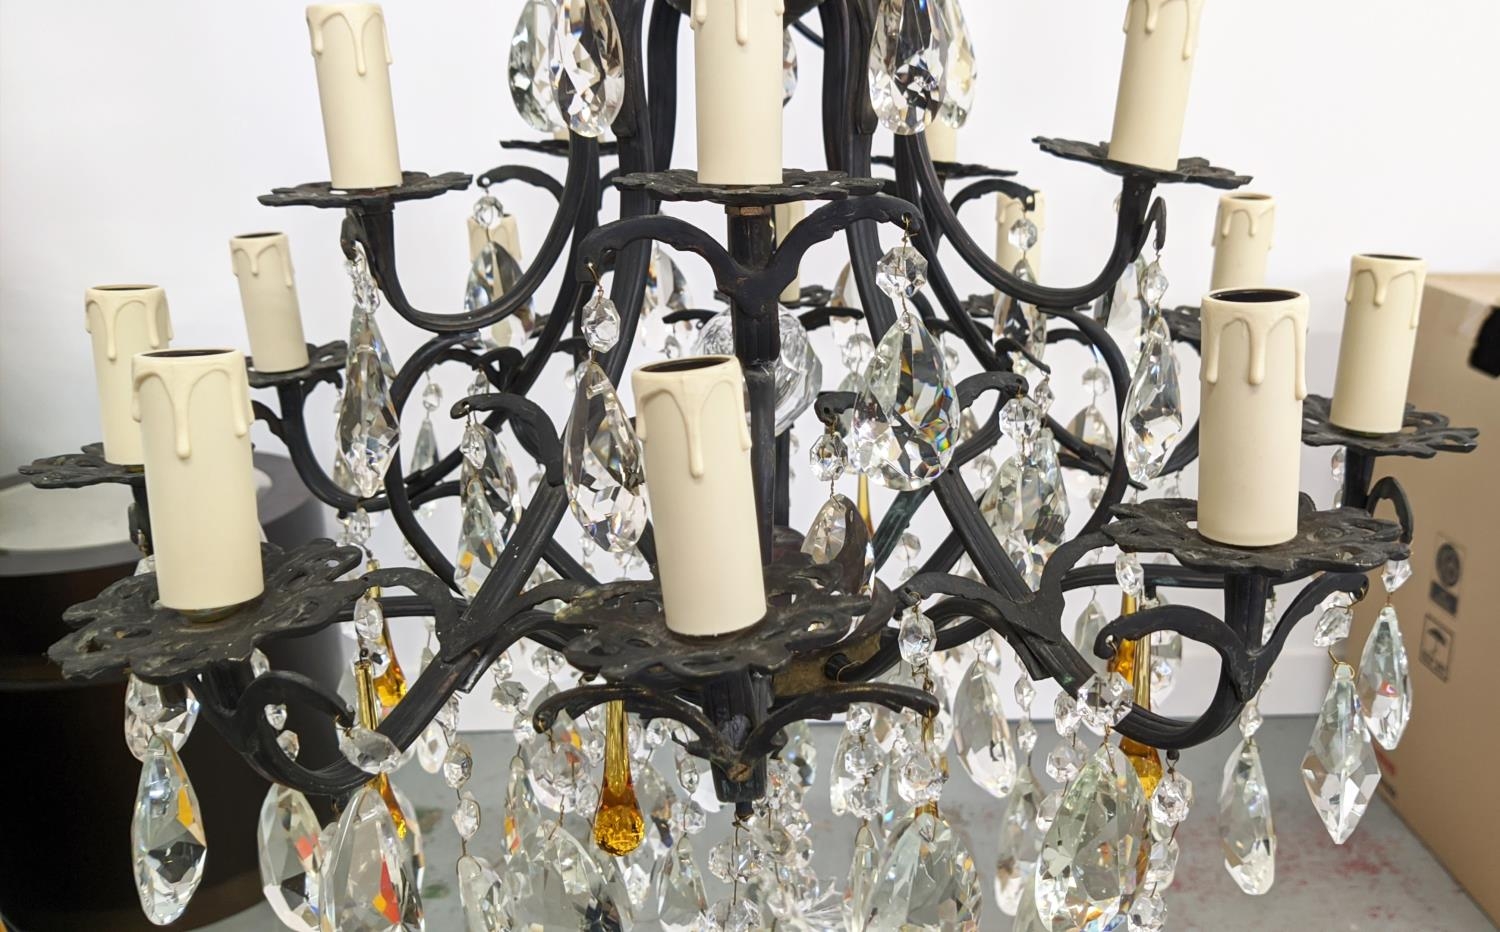 CHANDELIER, patinated metal with clear and amber glass drops from fifteen lights, 60cm W x 114cm - Image 9 of 18